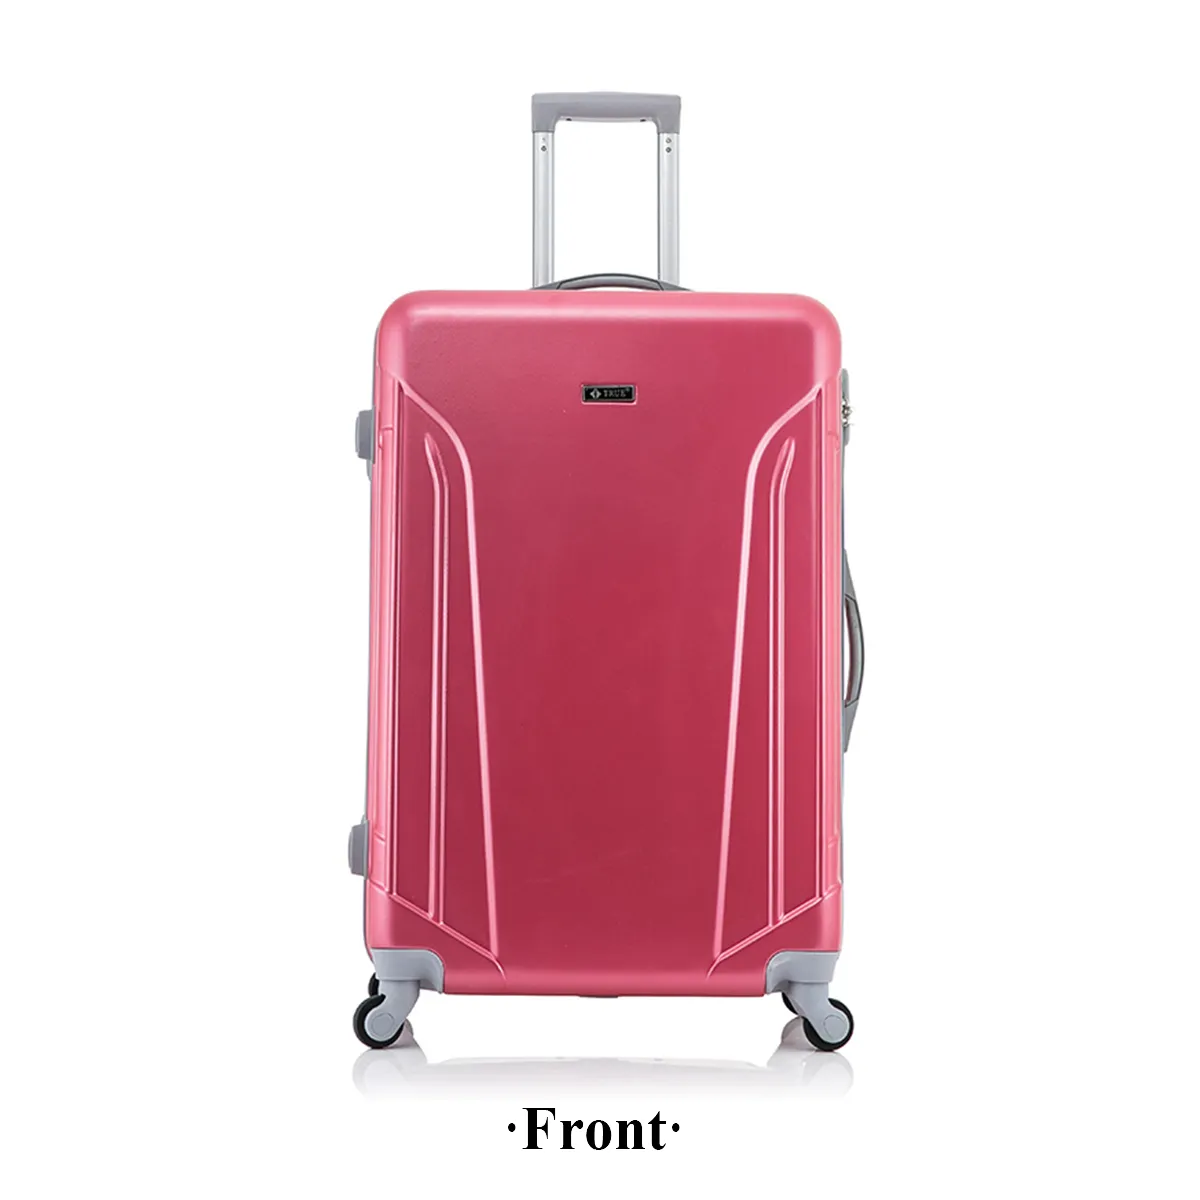 dFASHION ABS HARD SHELL SUITCASE SPINNER TRAVEL BAGS LUGGAGE SETS TROLLEY